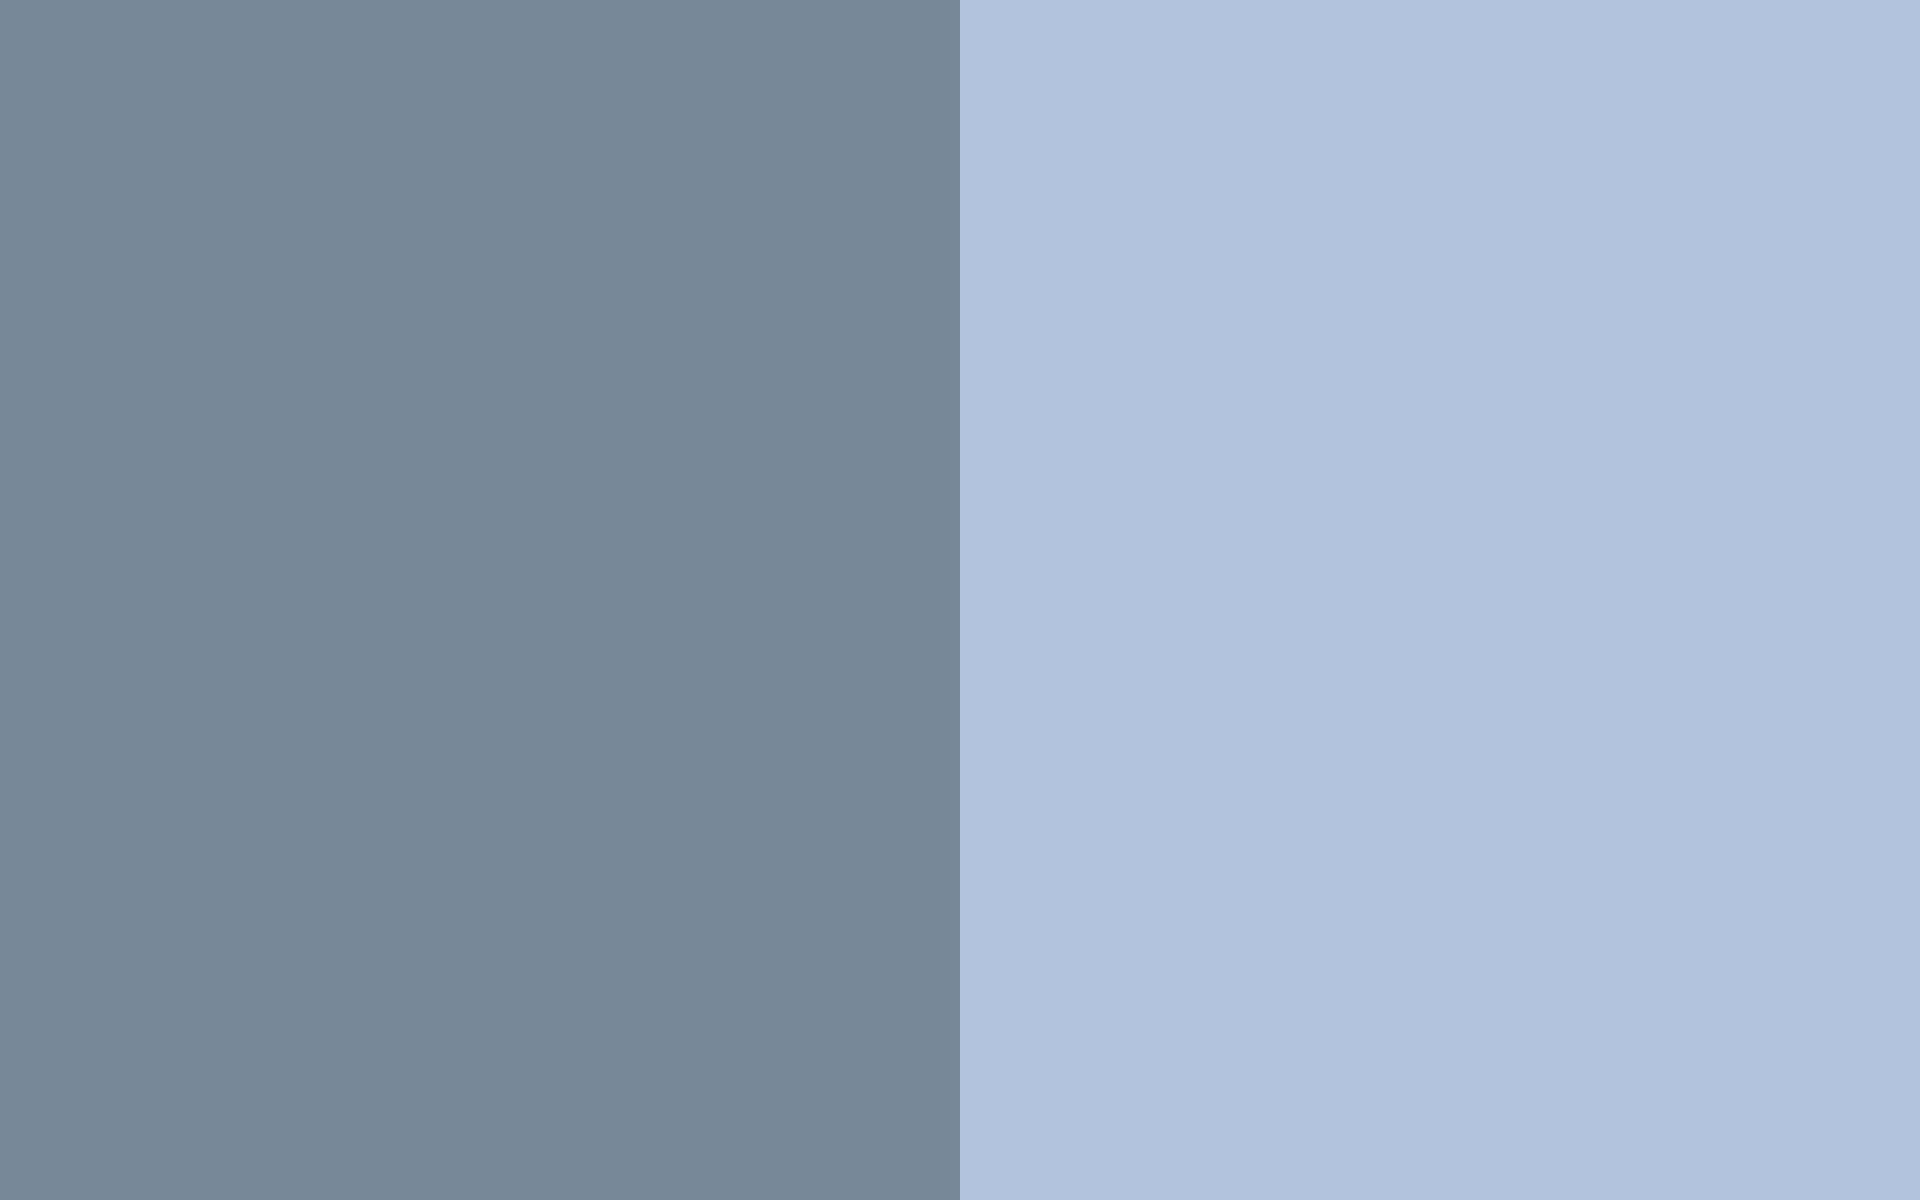 Brighten up your day with the vibrant blue and gray color palette